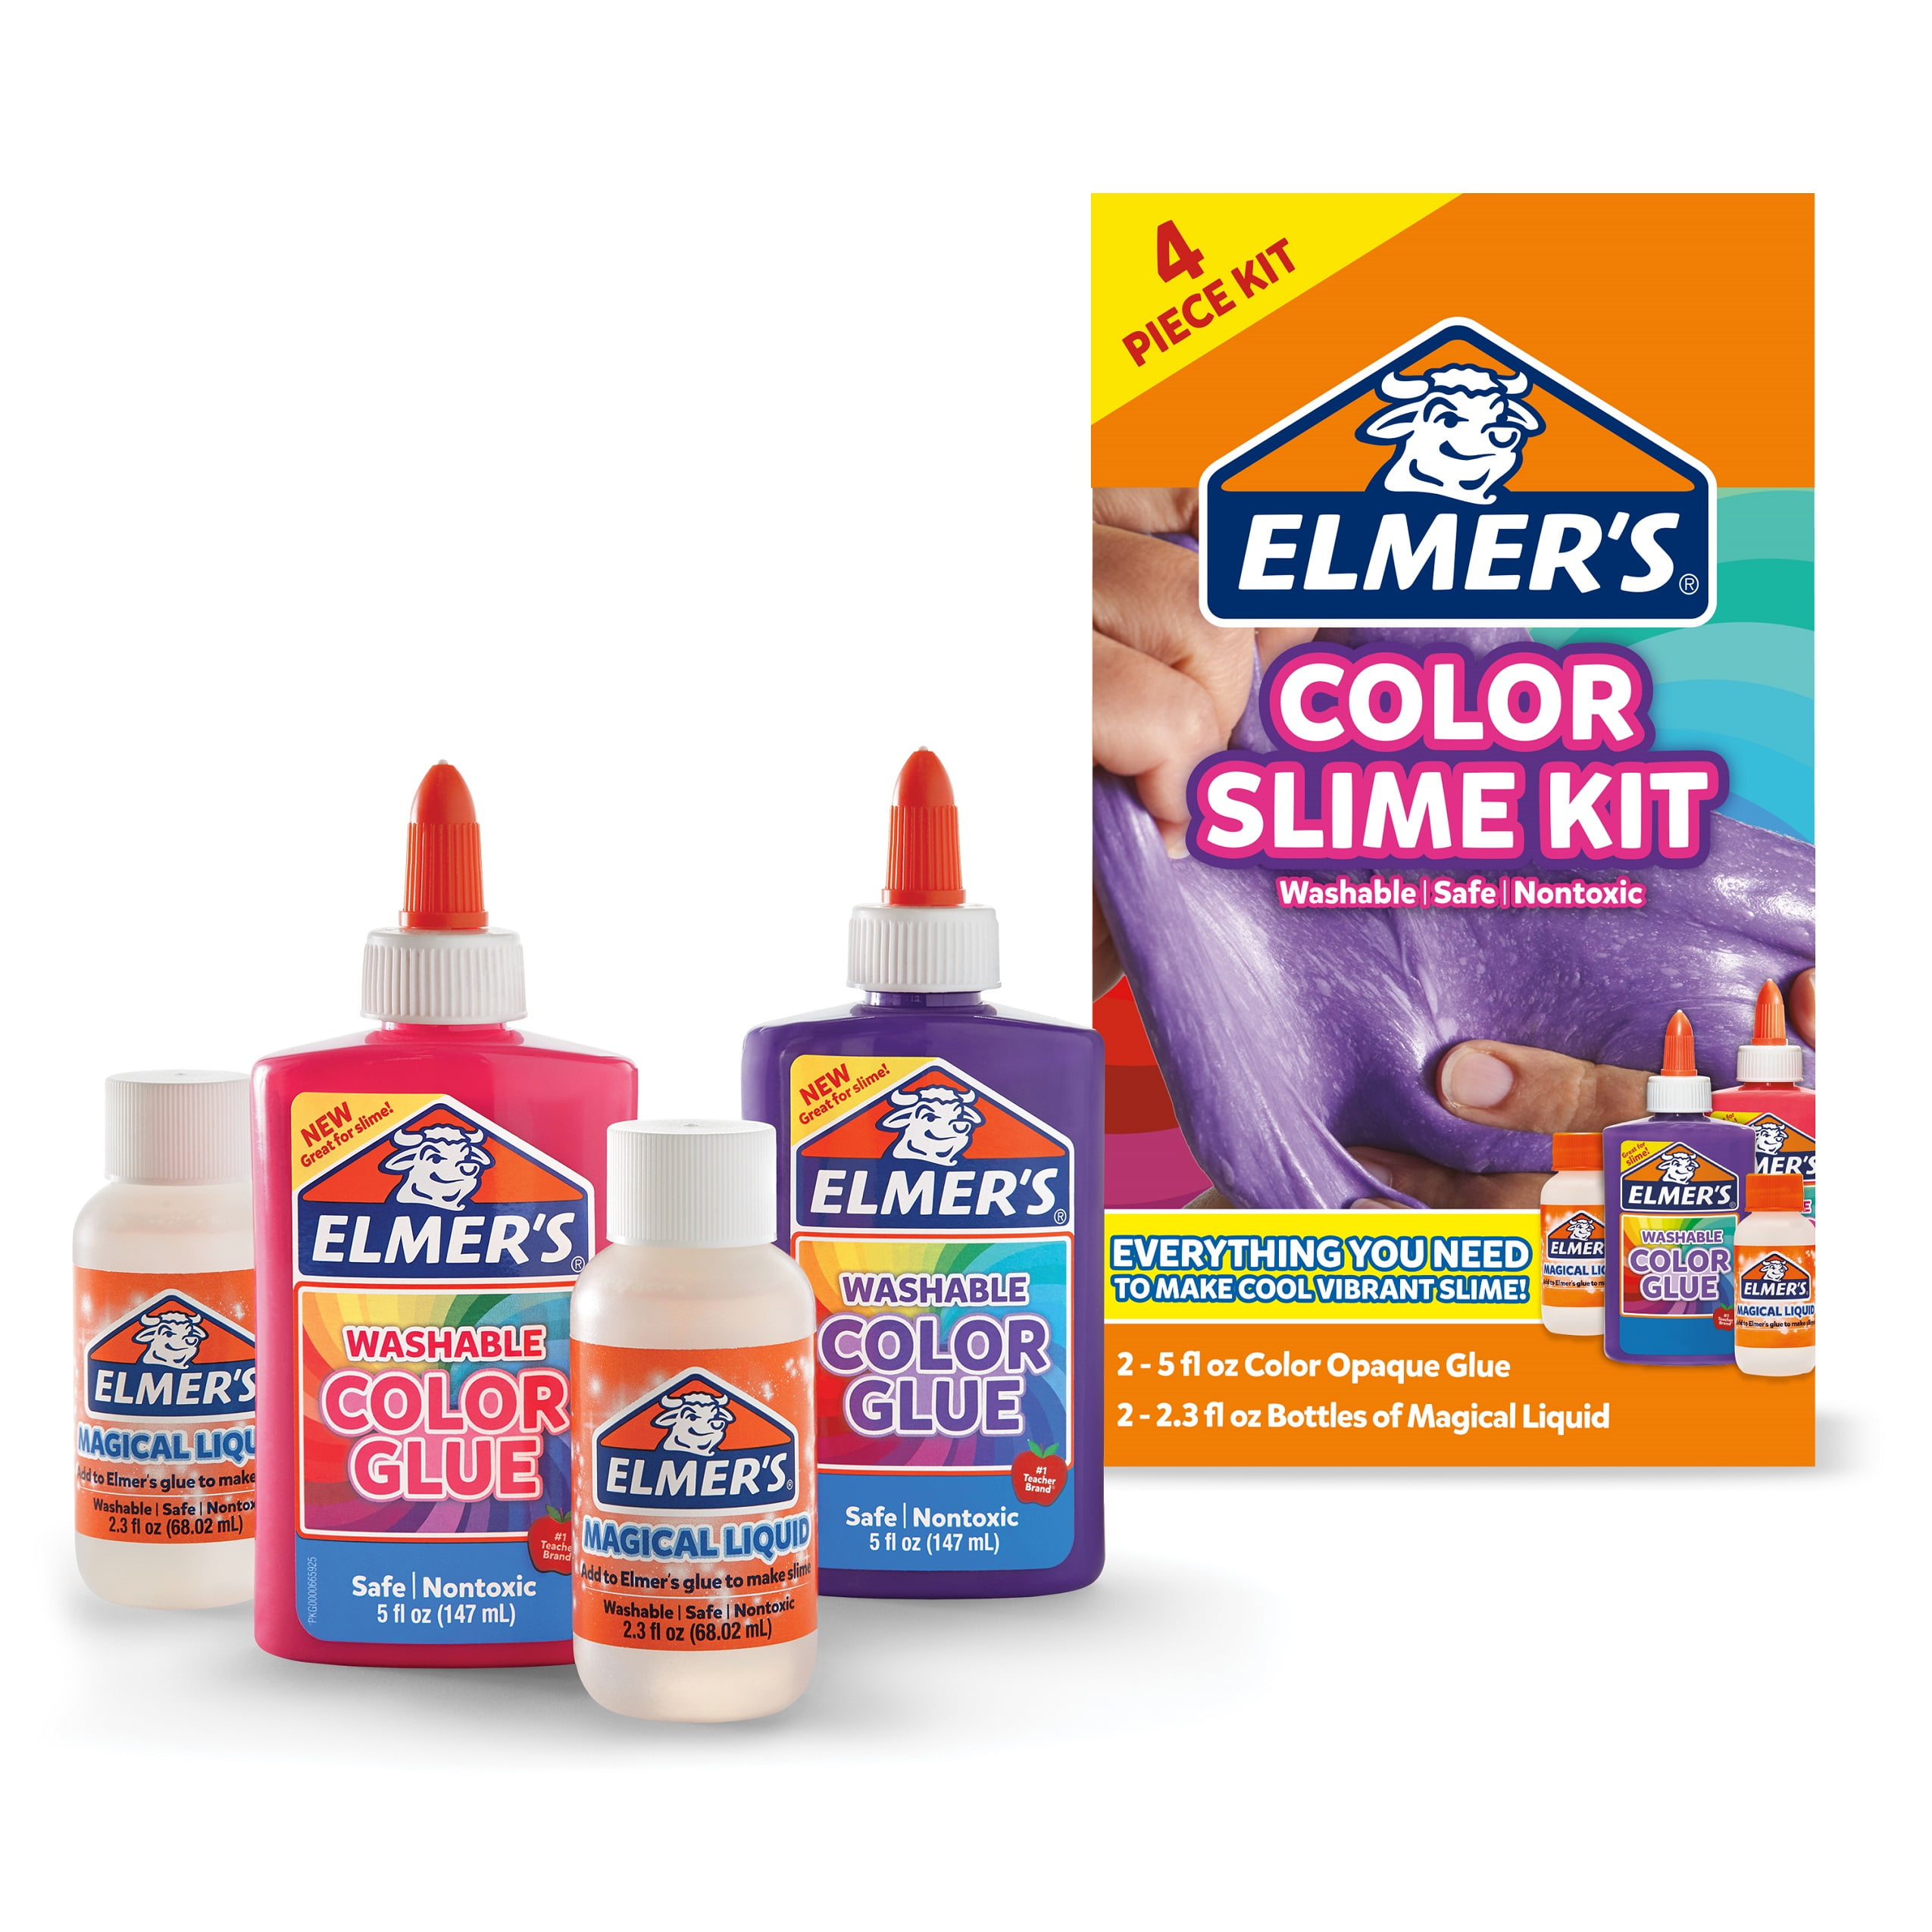 Elmer's Color Changing /translucent Color Slime Kit ,147ml Glue + 68ml  Magical Liquid Slime Activator, Washable, Safe ,nontoxic - Adhesives & Glue  - AliExpress